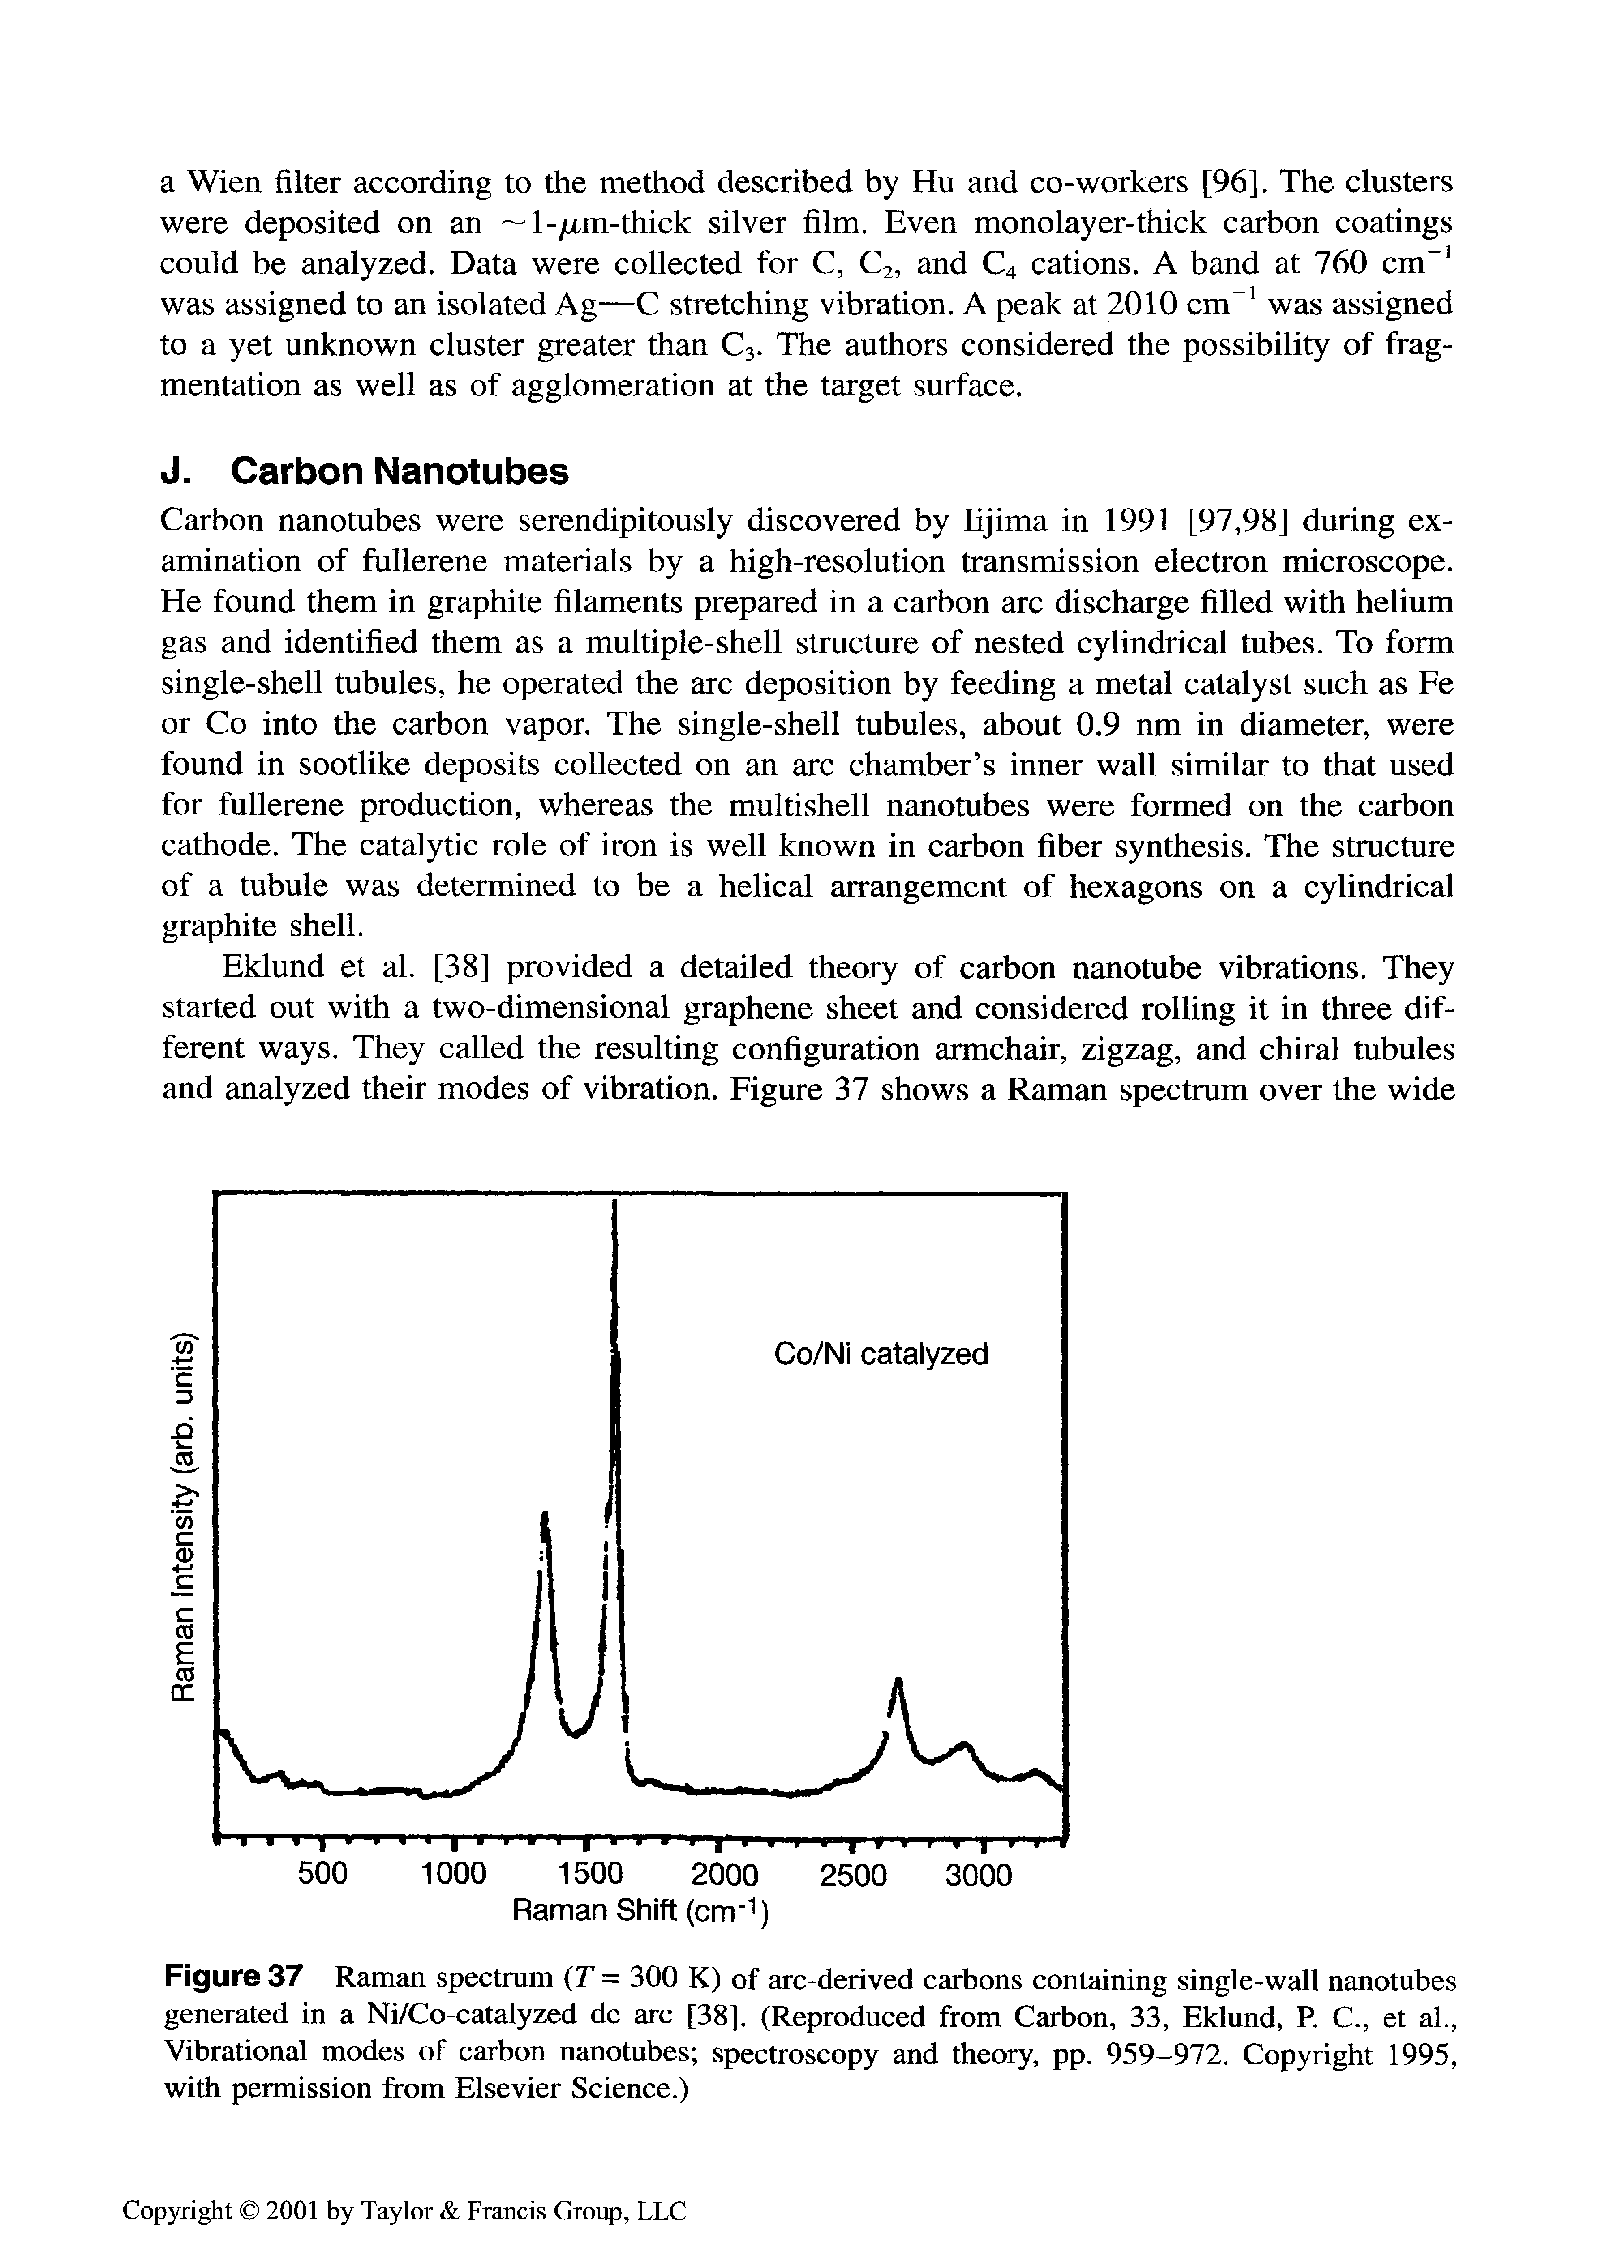 Figure 37 Raman spectrum T = 300 K) of arc-derived carbons containing single-wall nanotubes generated in a Ni/Co-catalyzed dc arc [38]. (Reproduced from Carbon, 33, Eklund, R C., et aL, Vibrational modes of carbon nanotubes spectroscopy and theory, pp. 959-972. Copyright 1995, with permission from Elsevier Science.)...